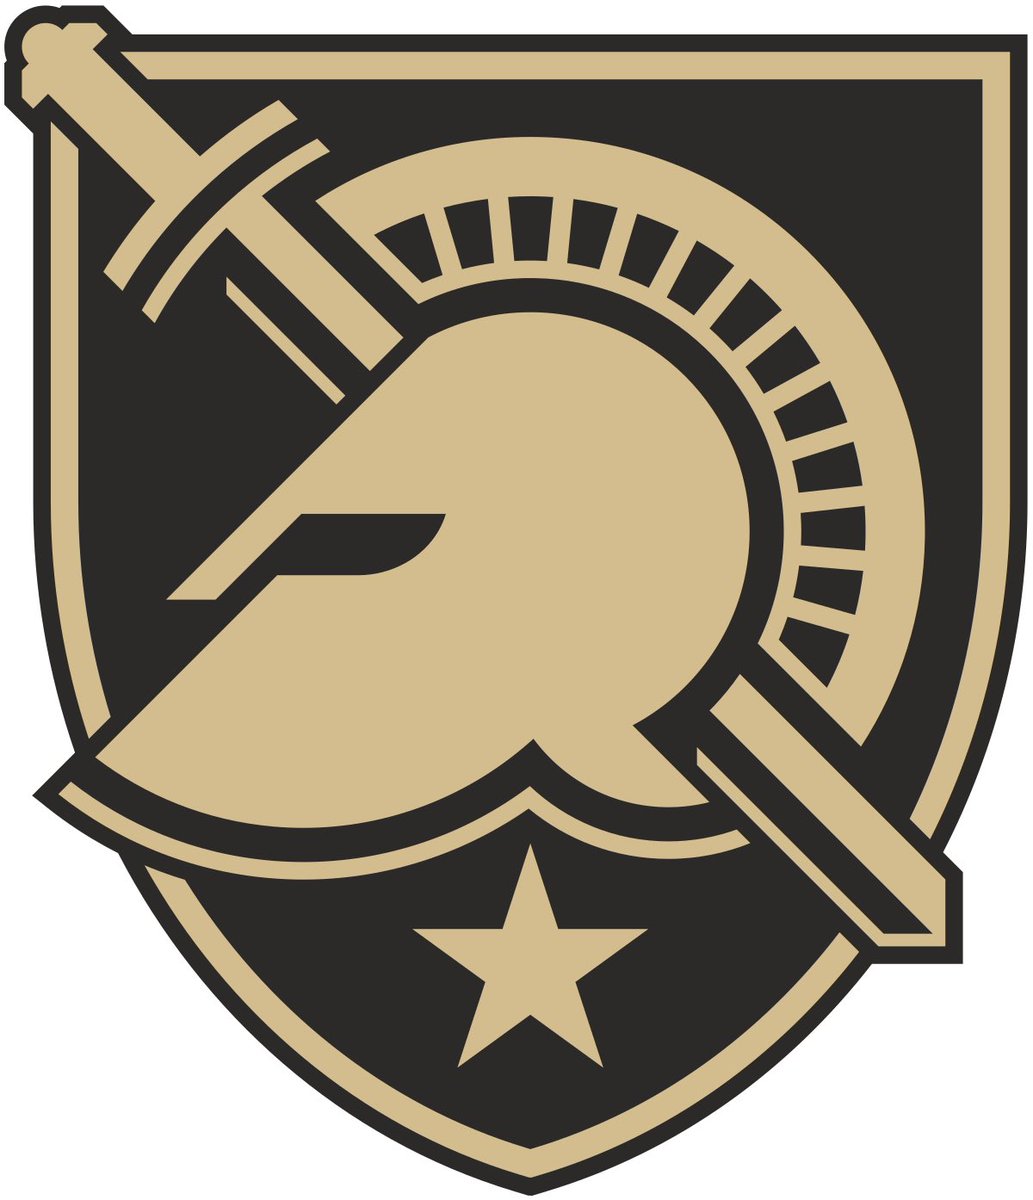 After a great call with @Coach_romero18 and @ArmyWP_Football I am blessed to receive my first D1 offer! @chadcawood @StillH2OLcoach @CoachDA98 @Coach_Worley @MikeViti @CoachJeffMonken